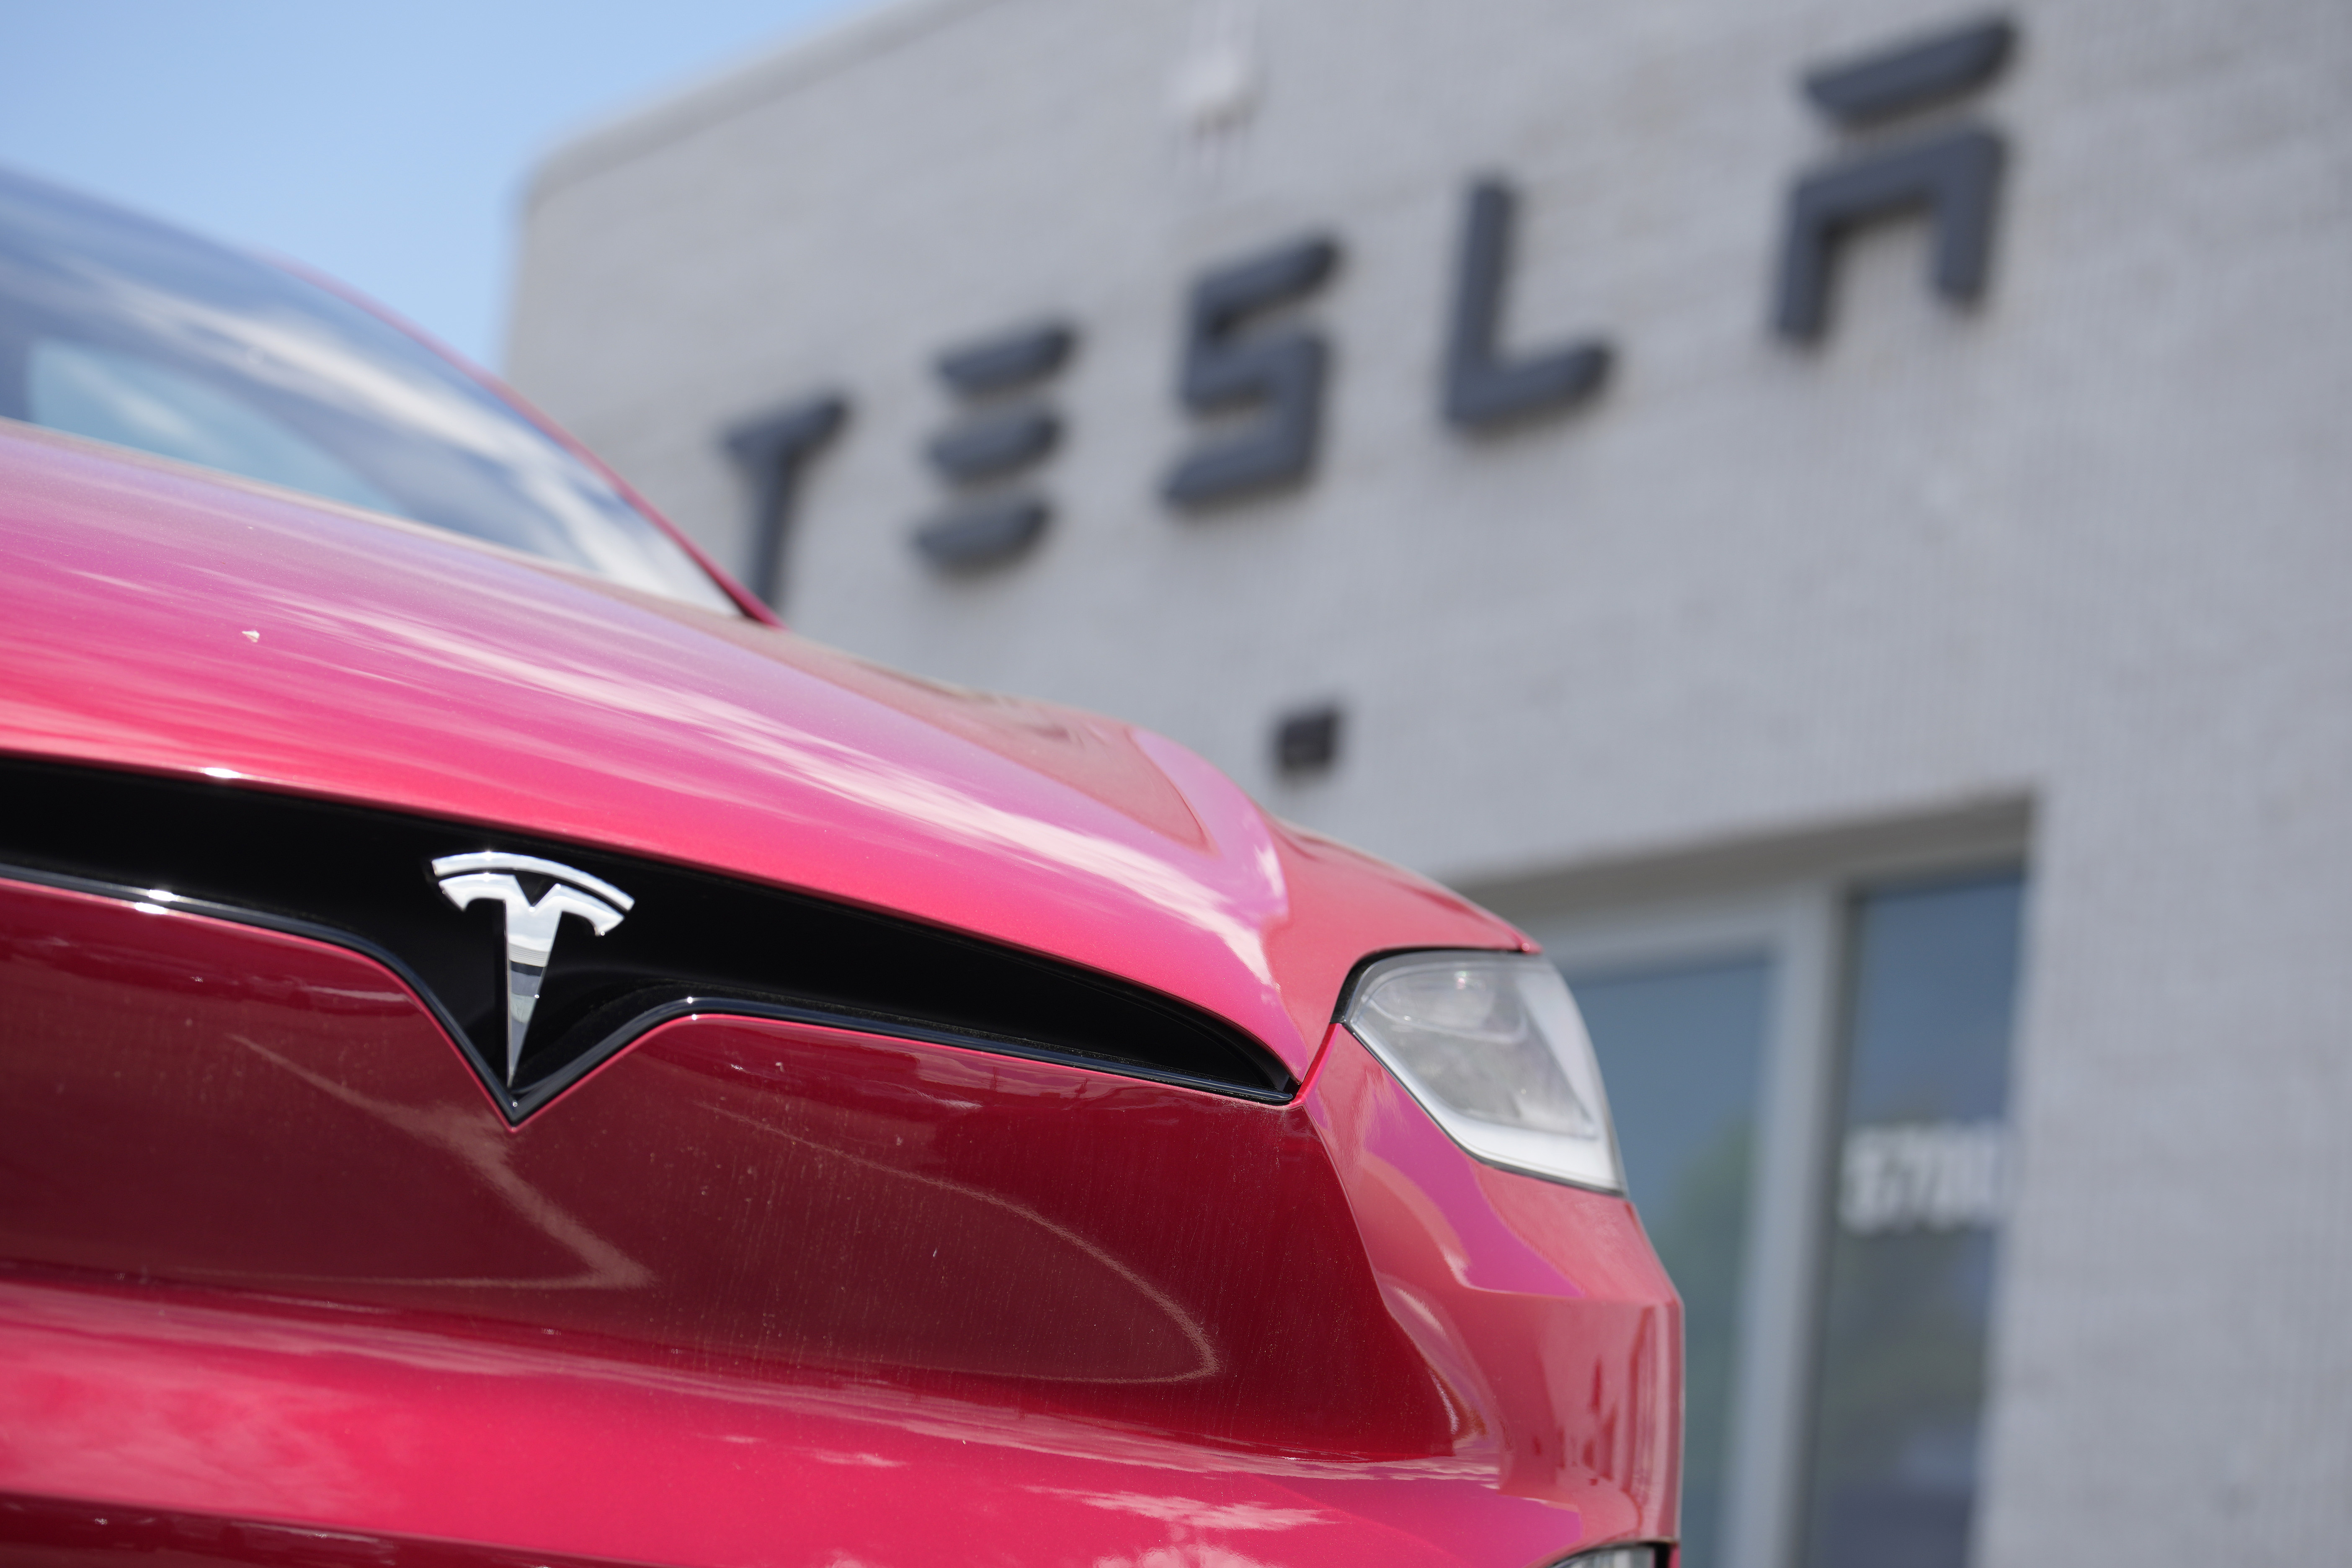 Tesla income jumps 20%, but shares fall after hours amid profit